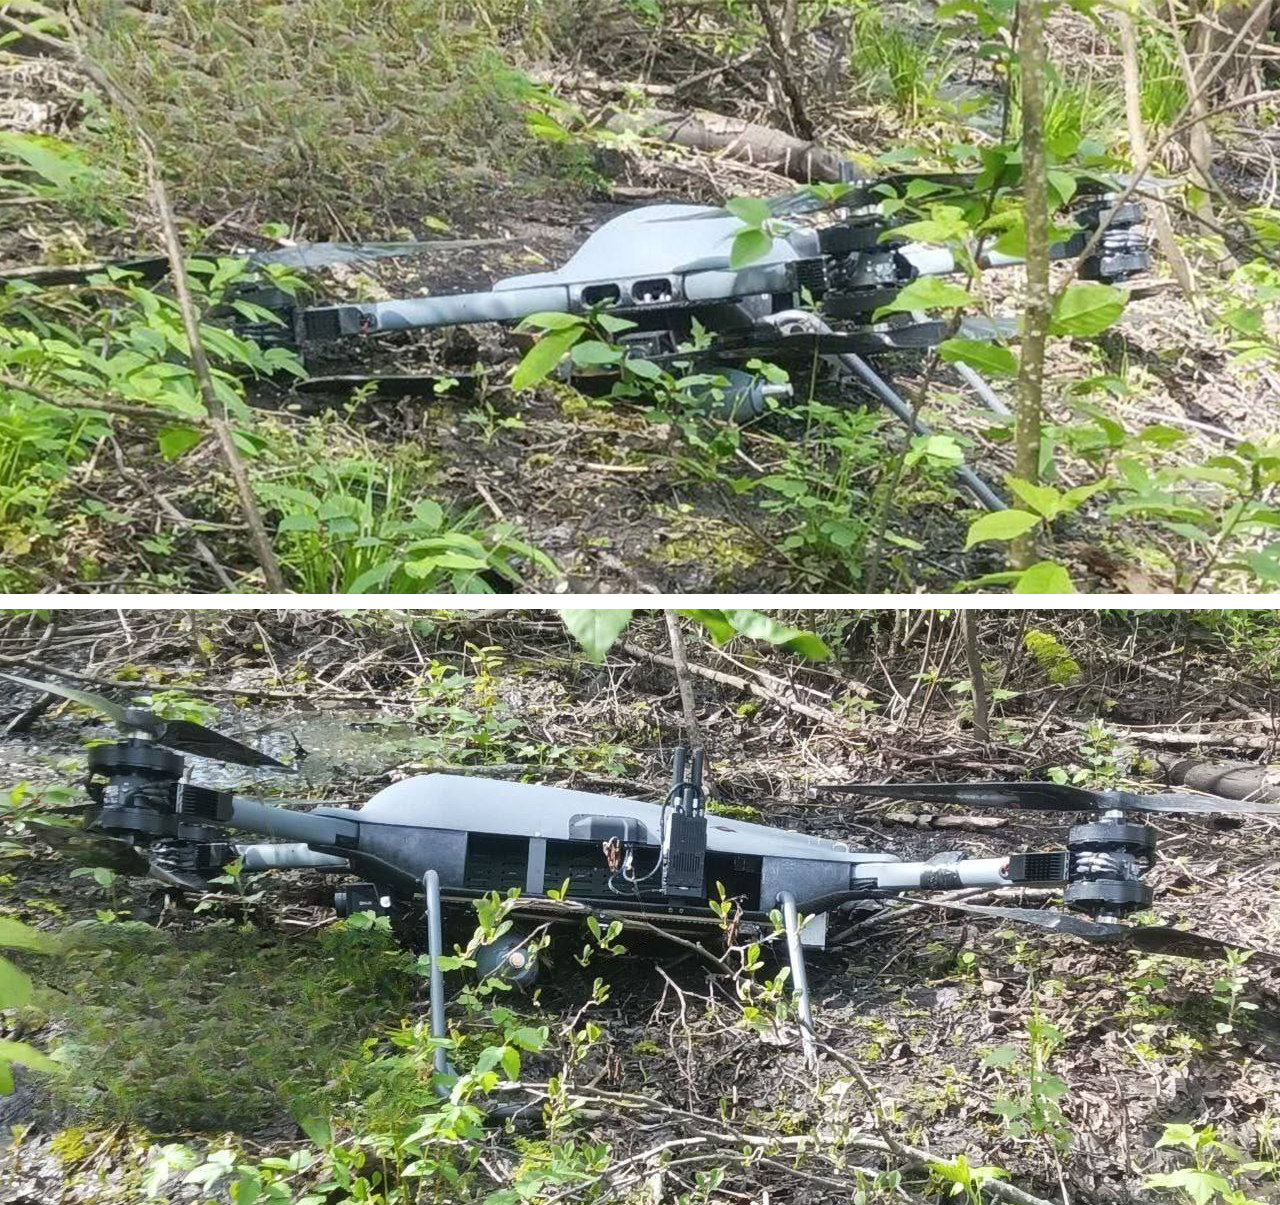 Malloy T150 (TRV150) drone downed by russian forces